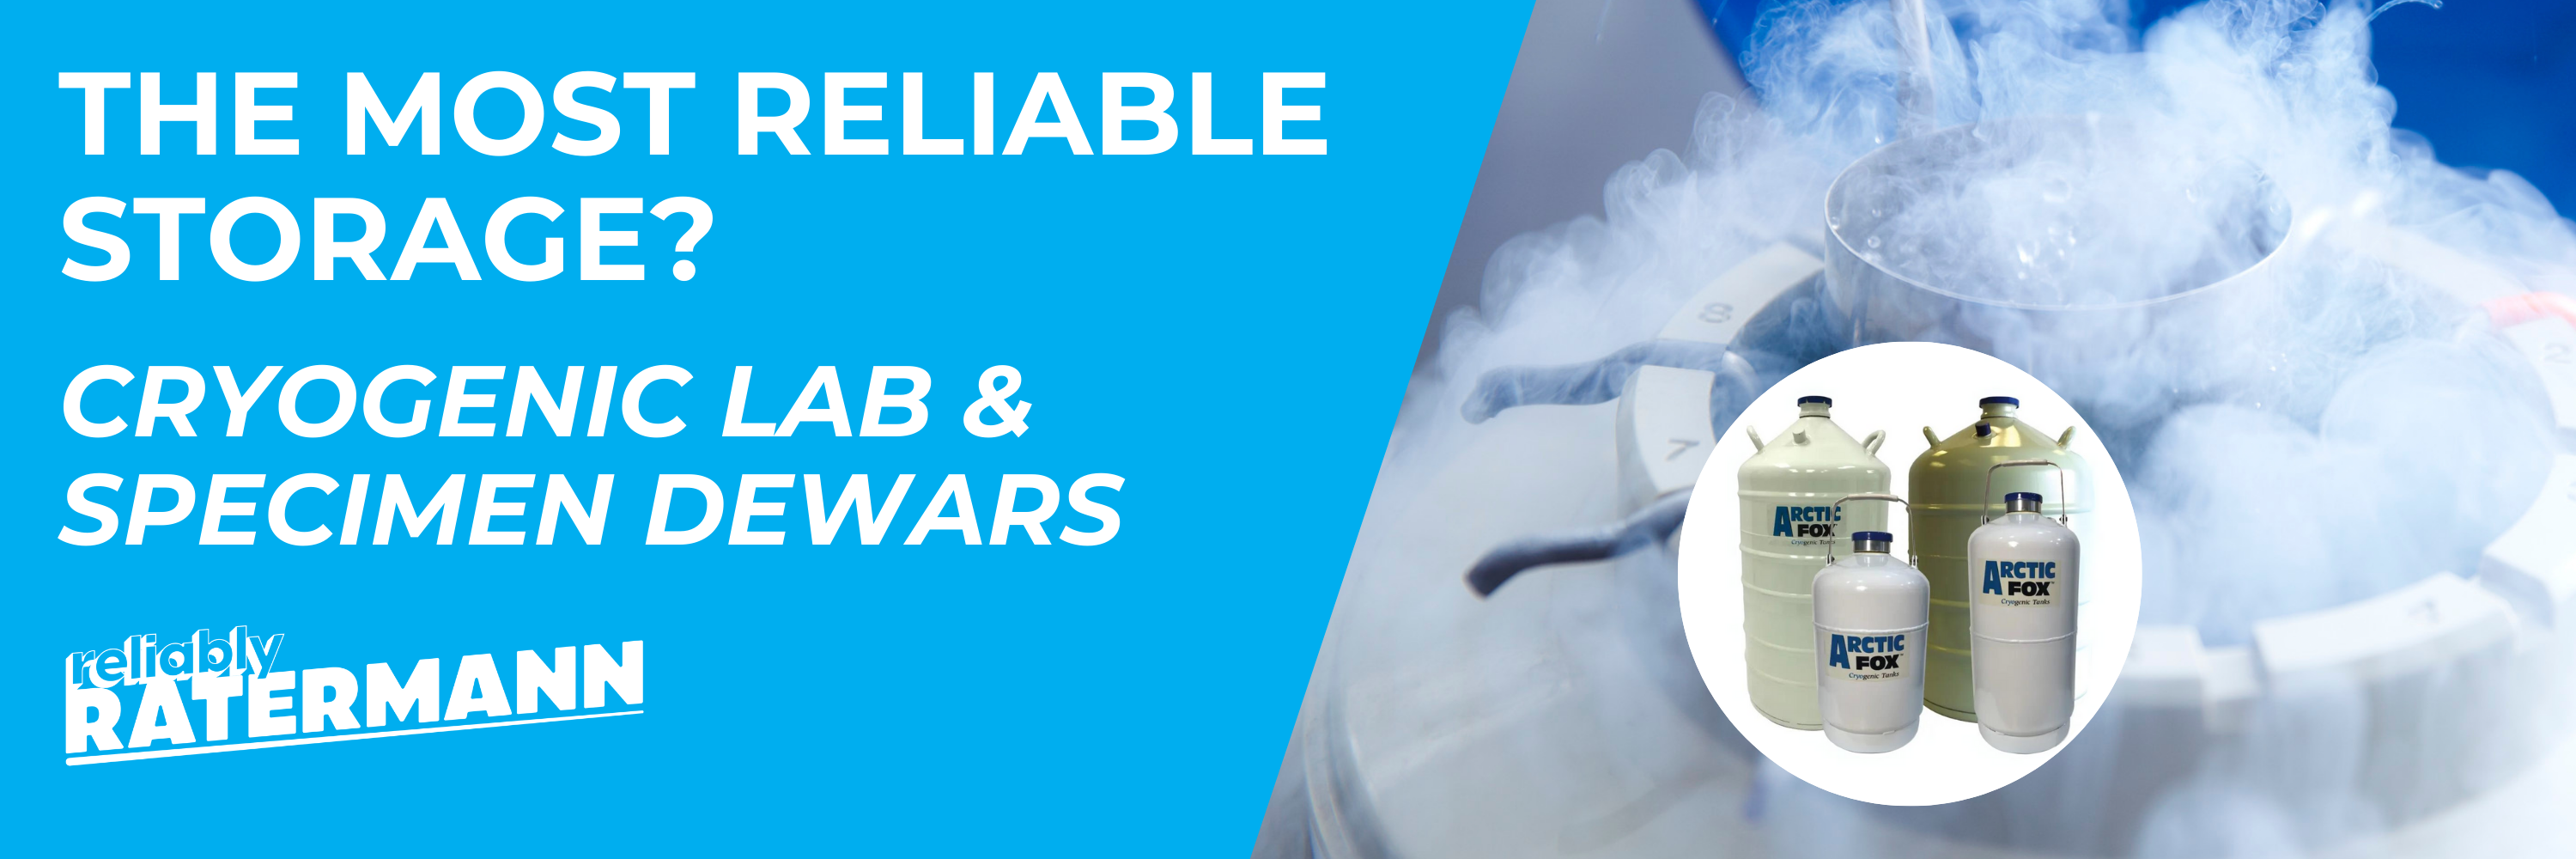 Cryogenic Lab & Specimen Dewars for the Most Reliable Storage